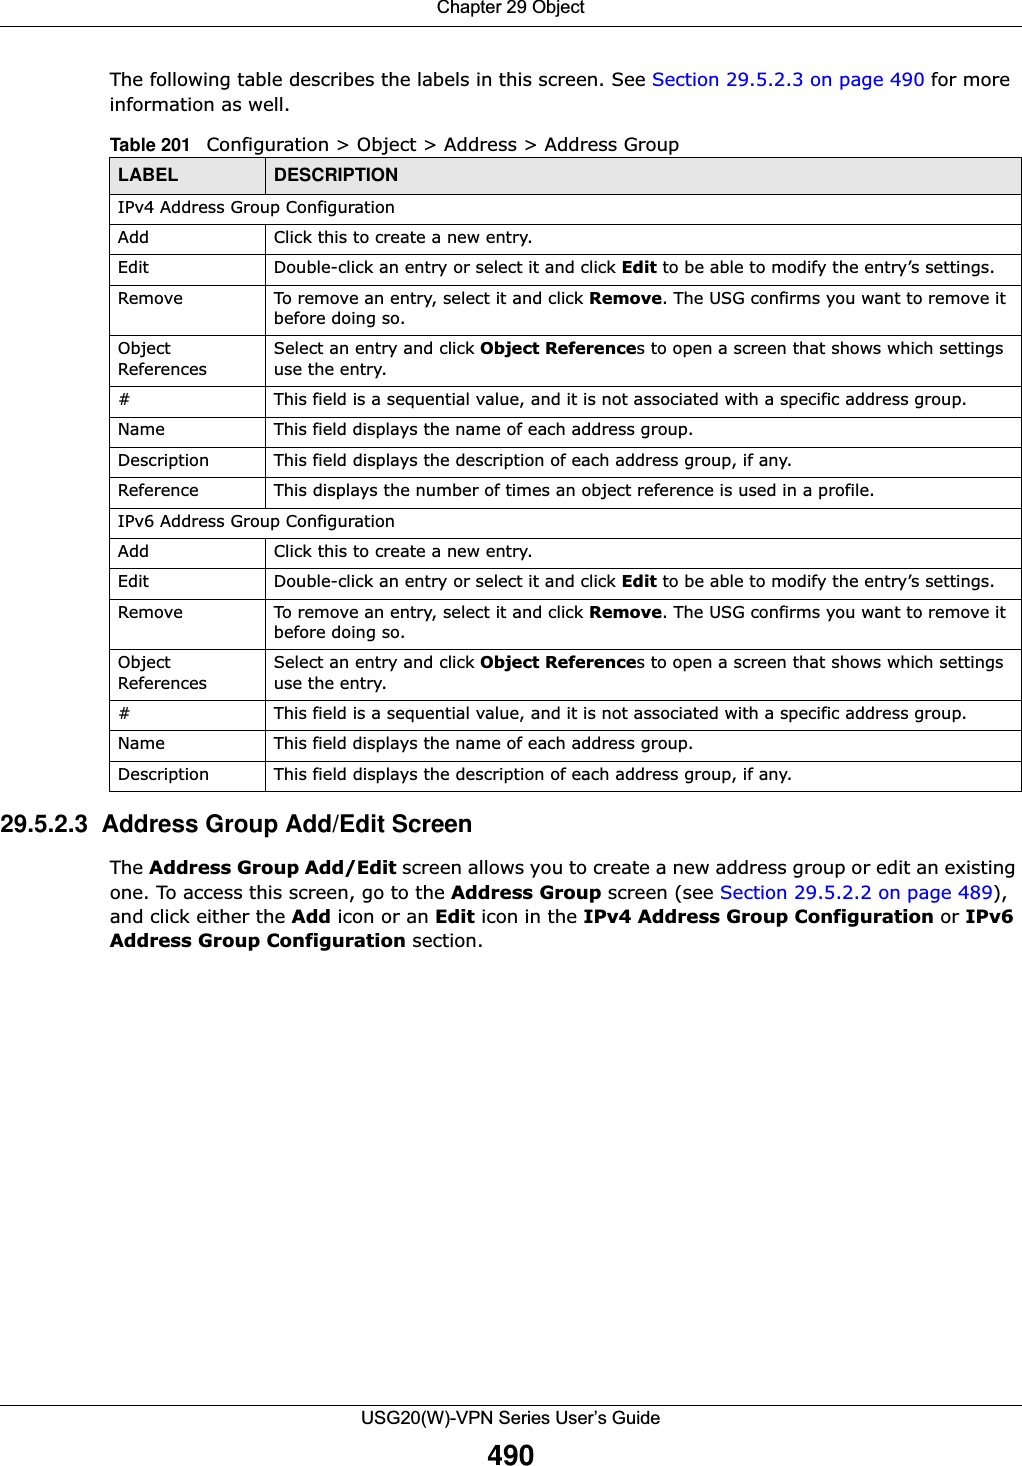 Chapter 29 ObjectUSG20(W)-VPN Series User’s Guide490The following table describes the labels in this screen. See Section 29.5.2.3 on page 490 for more information as well.  29.5.2.3  Address Group Add/Edit ScreenThe Address Group Add/Edit screen allows you to create a new address group or edit an existing one. To access this screen, go to the Address Group screen (see Section 29.5.2.2 on page 489), and click either the Add icon or an Edit icon in the IPv4 Address Group Configuration or IPv6Address Group Configuration section.Table 201   Configuration &gt; Object &gt; Address &gt; Address GroupLABEL DESCRIPTIONIPv4 Address Group ConfigurationAdd Click this to create a new entry.Edit Double-click an entry or select it and click Edit to be able to modify the entry’s settings. Remove To remove an entry, select it and click Remove. The USG confirms you want to remove it before doing so.Object ReferencesSelect an entry and click Object References to open a screen that shows which settings use the entry. # This field is a sequential value, and it is not associated with a specific address group.Name This field displays the name of each address group.Description This field displays the description of each address group, if any.Reference This displays the number of times an object reference is used in a profile.IPv6 Address Group ConfigurationAdd Click this to create a new entry.Edit Double-click an entry or select it and click Edit to be able to modify the entry’s settings. Remove To remove an entry, select it and click Remove. The USG confirms you want to remove it before doing so.Object ReferencesSelect an entry and click Object References to open a screen that shows which settings use the entry.# This field is a sequential value, and it is not associated with a specific address group.Name This field displays the name of each address group.Description This field displays the description of each address group, if any.